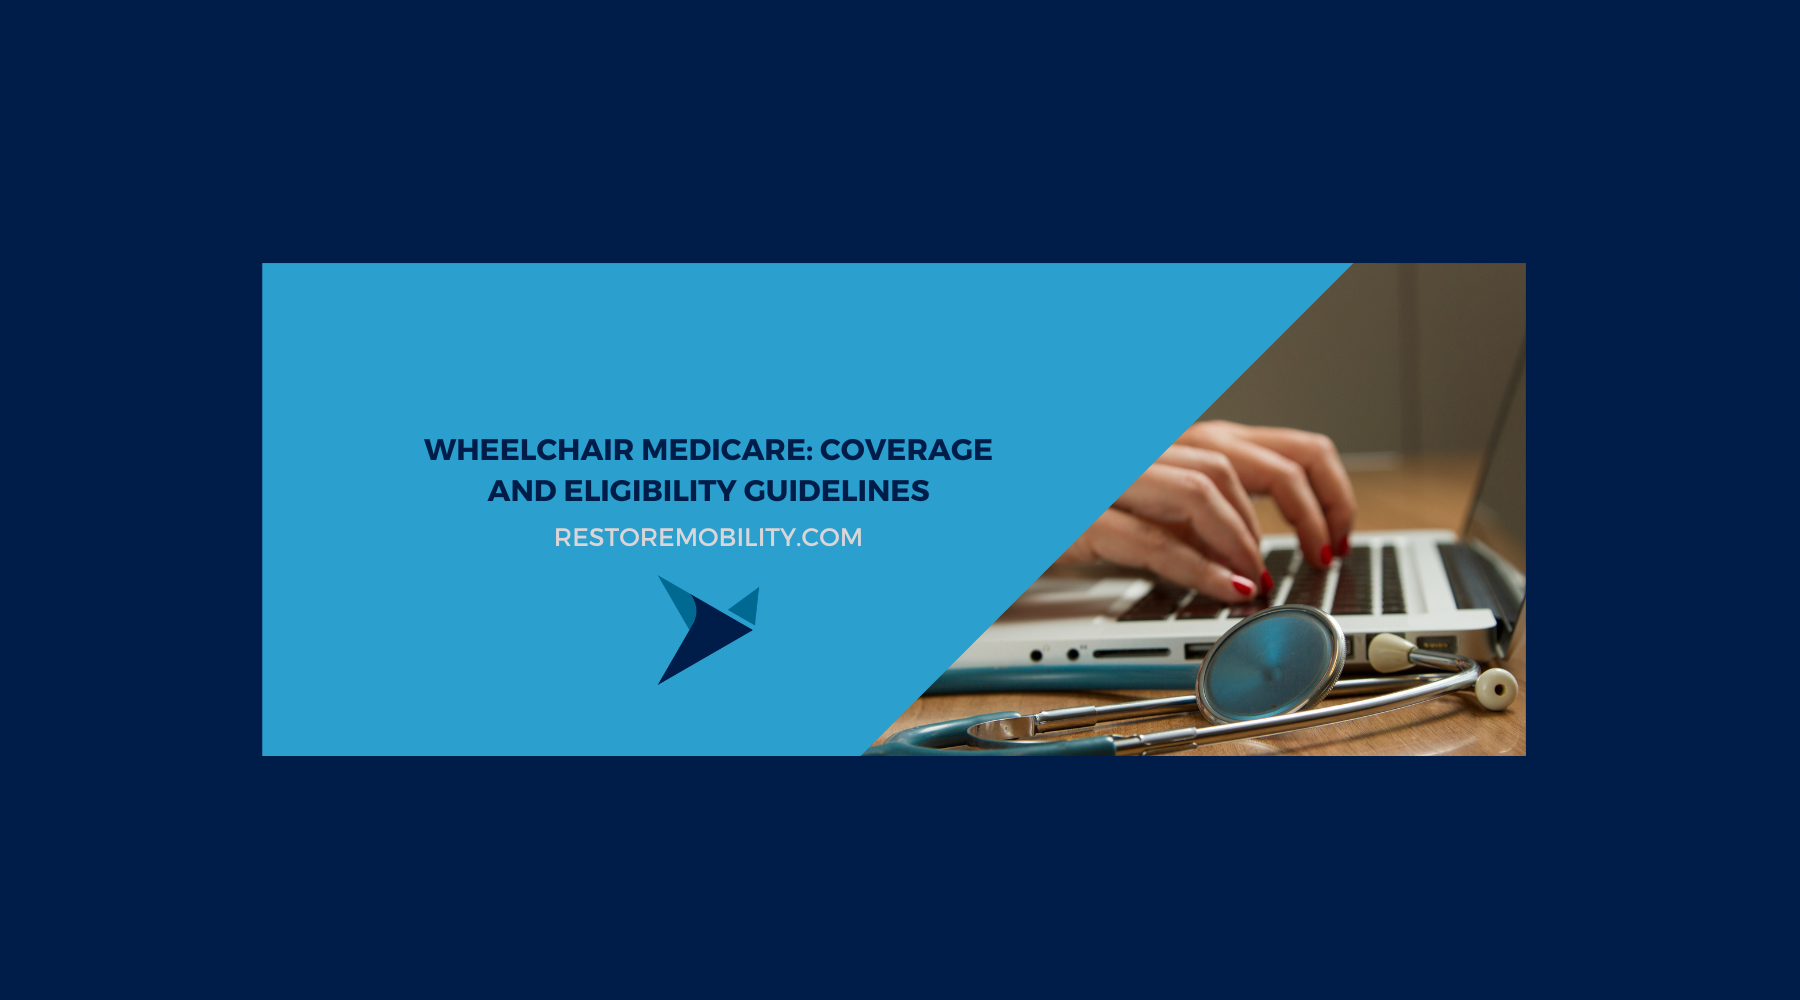 Wheelchair Medicare: Coverage and Eligibility Guidelines